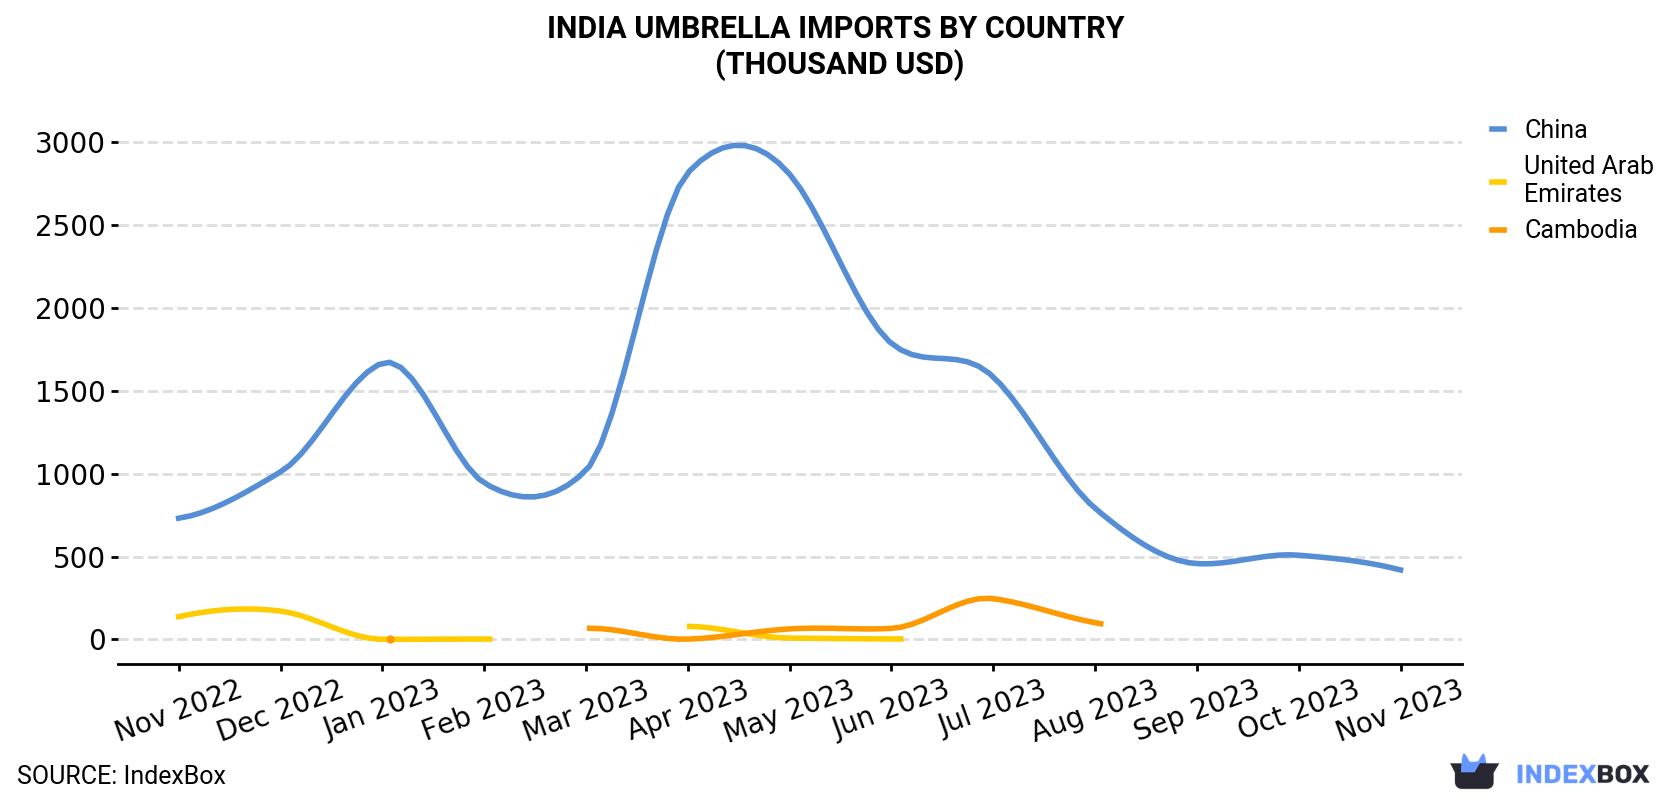 India Umbrella Imports By Country (Thousand USD)